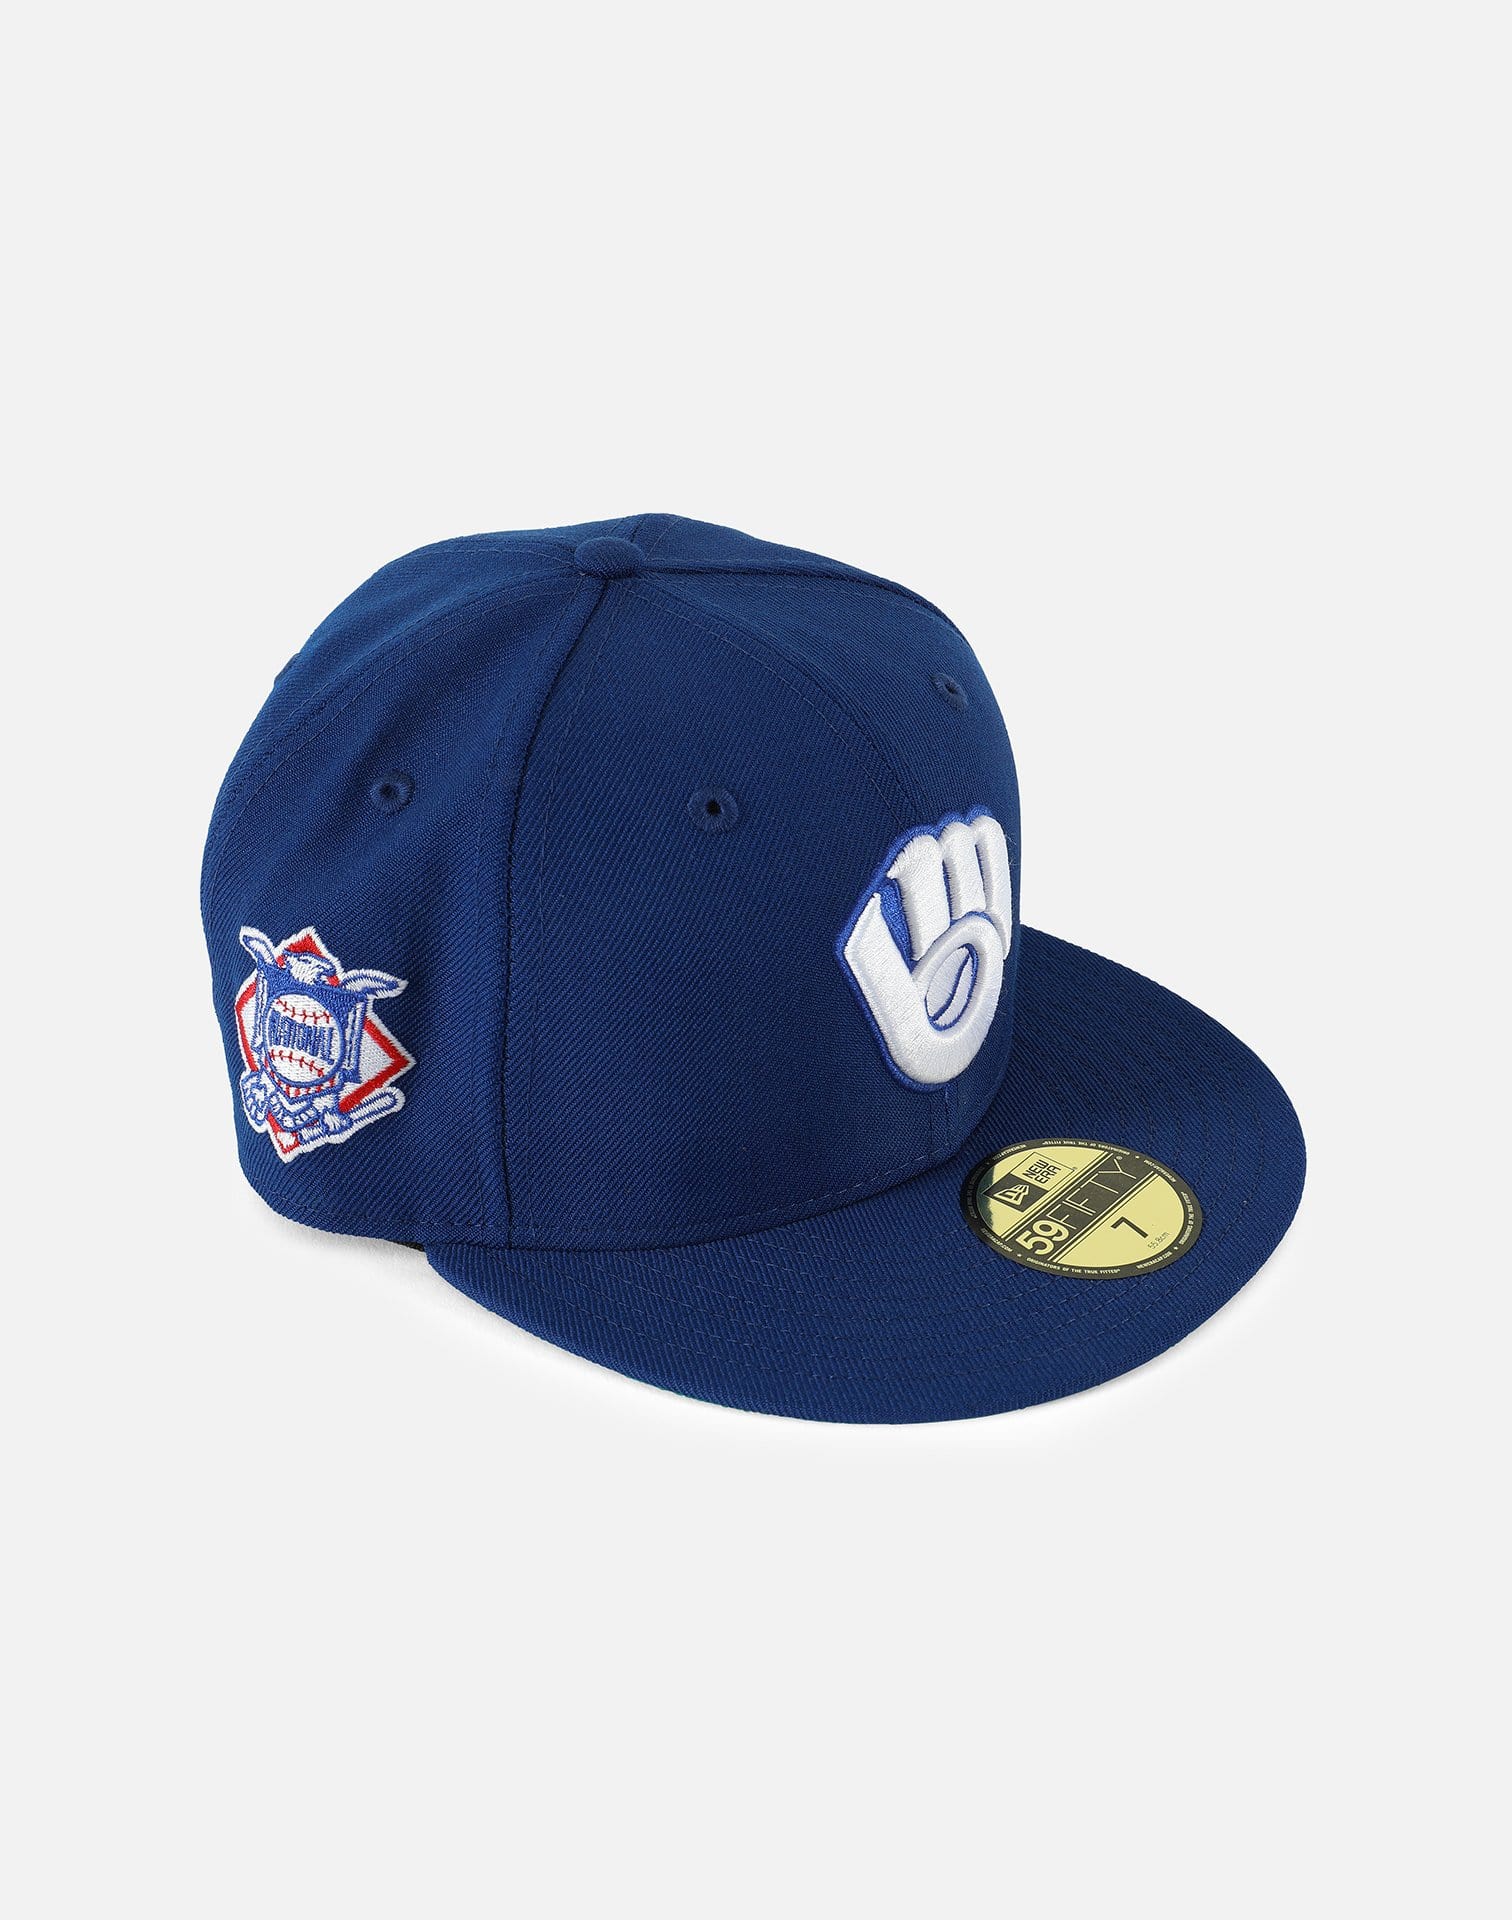 New Era 5950 MLB MILWAUKEE BREWERS FITTED HAT